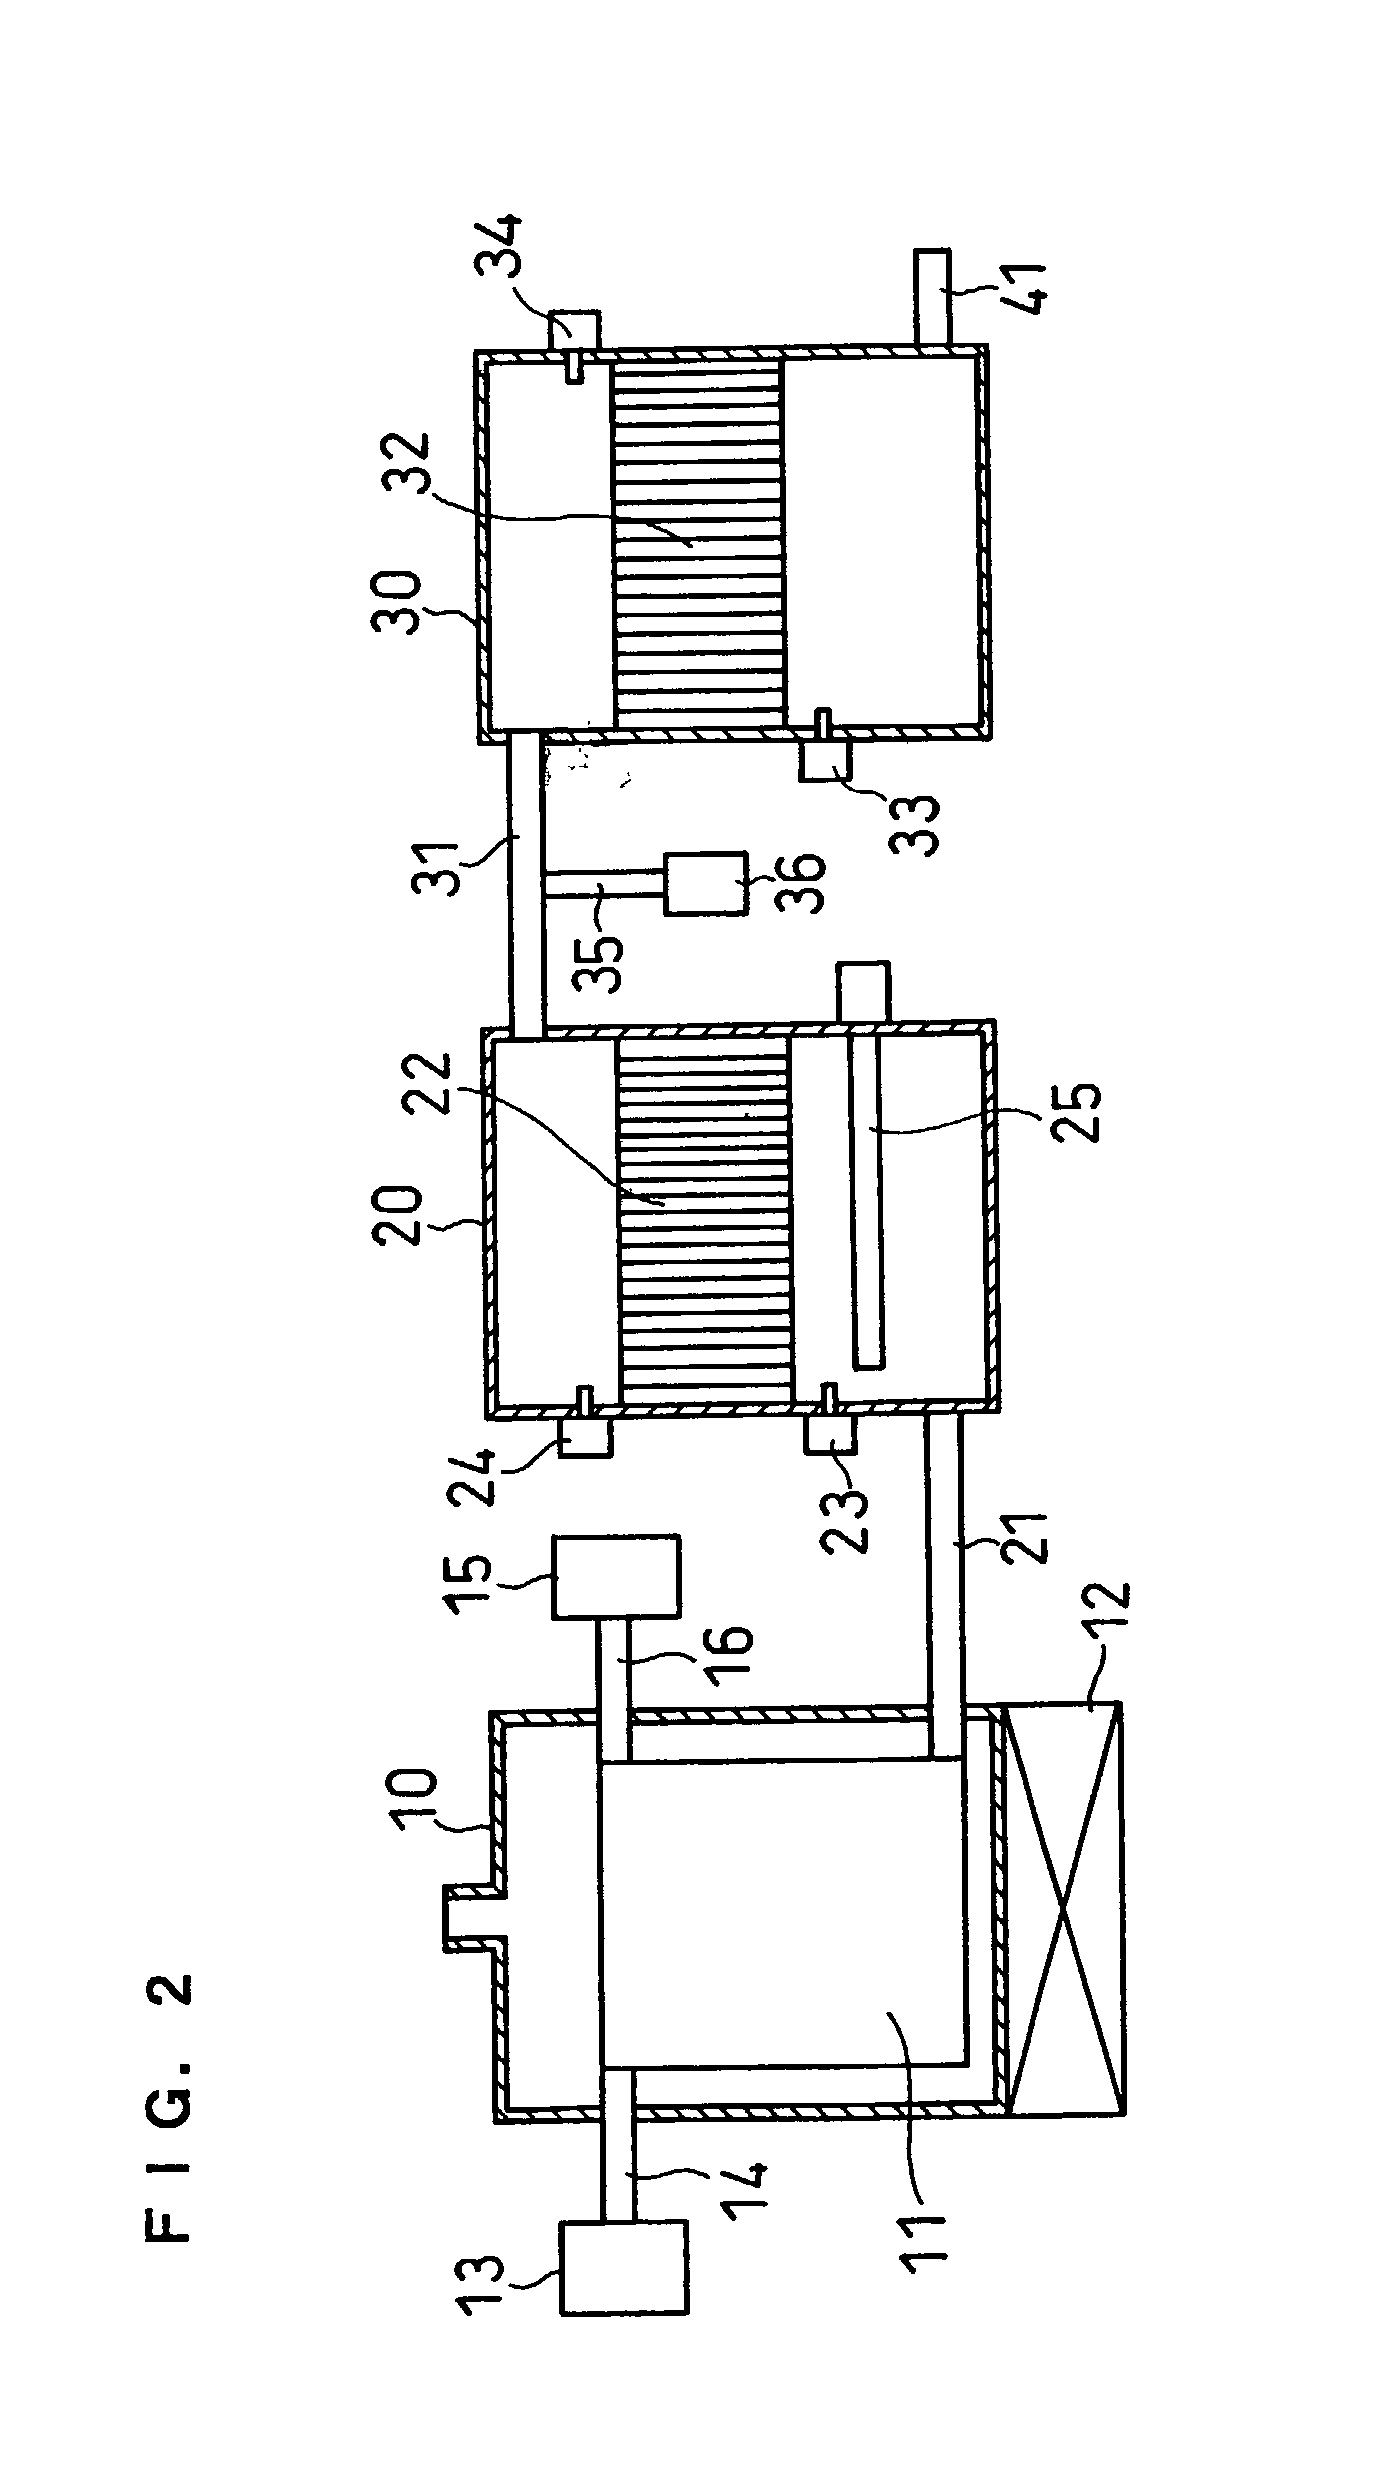 Apparatus for forming hydrogen